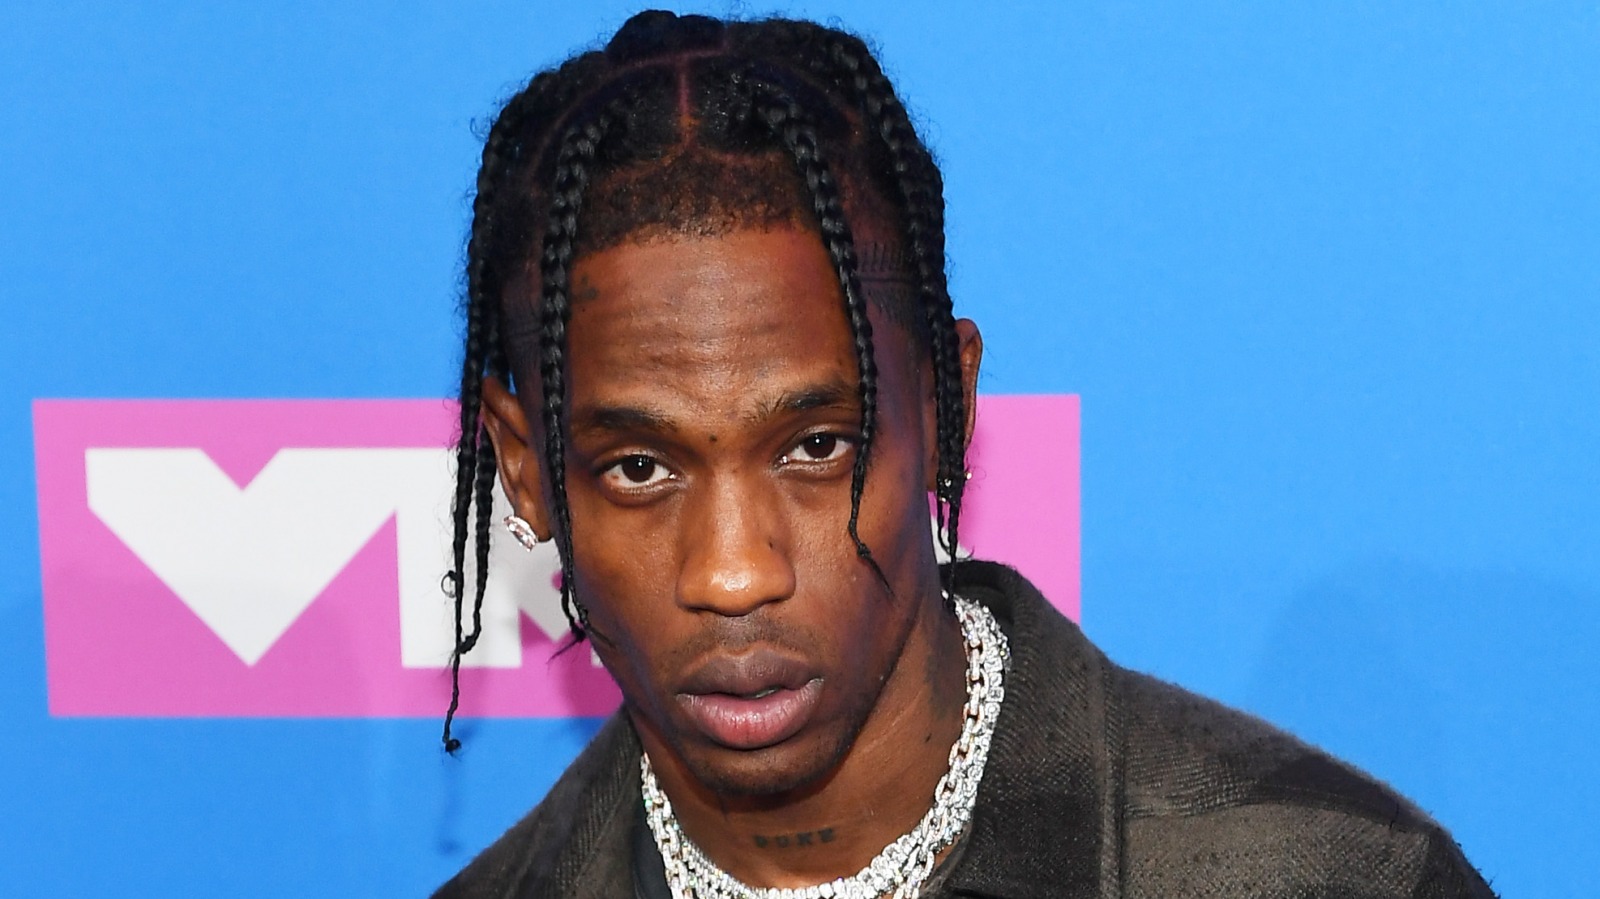 Travis Scott's Blue Hair: How to Maintain and Care for the Color - wide 3